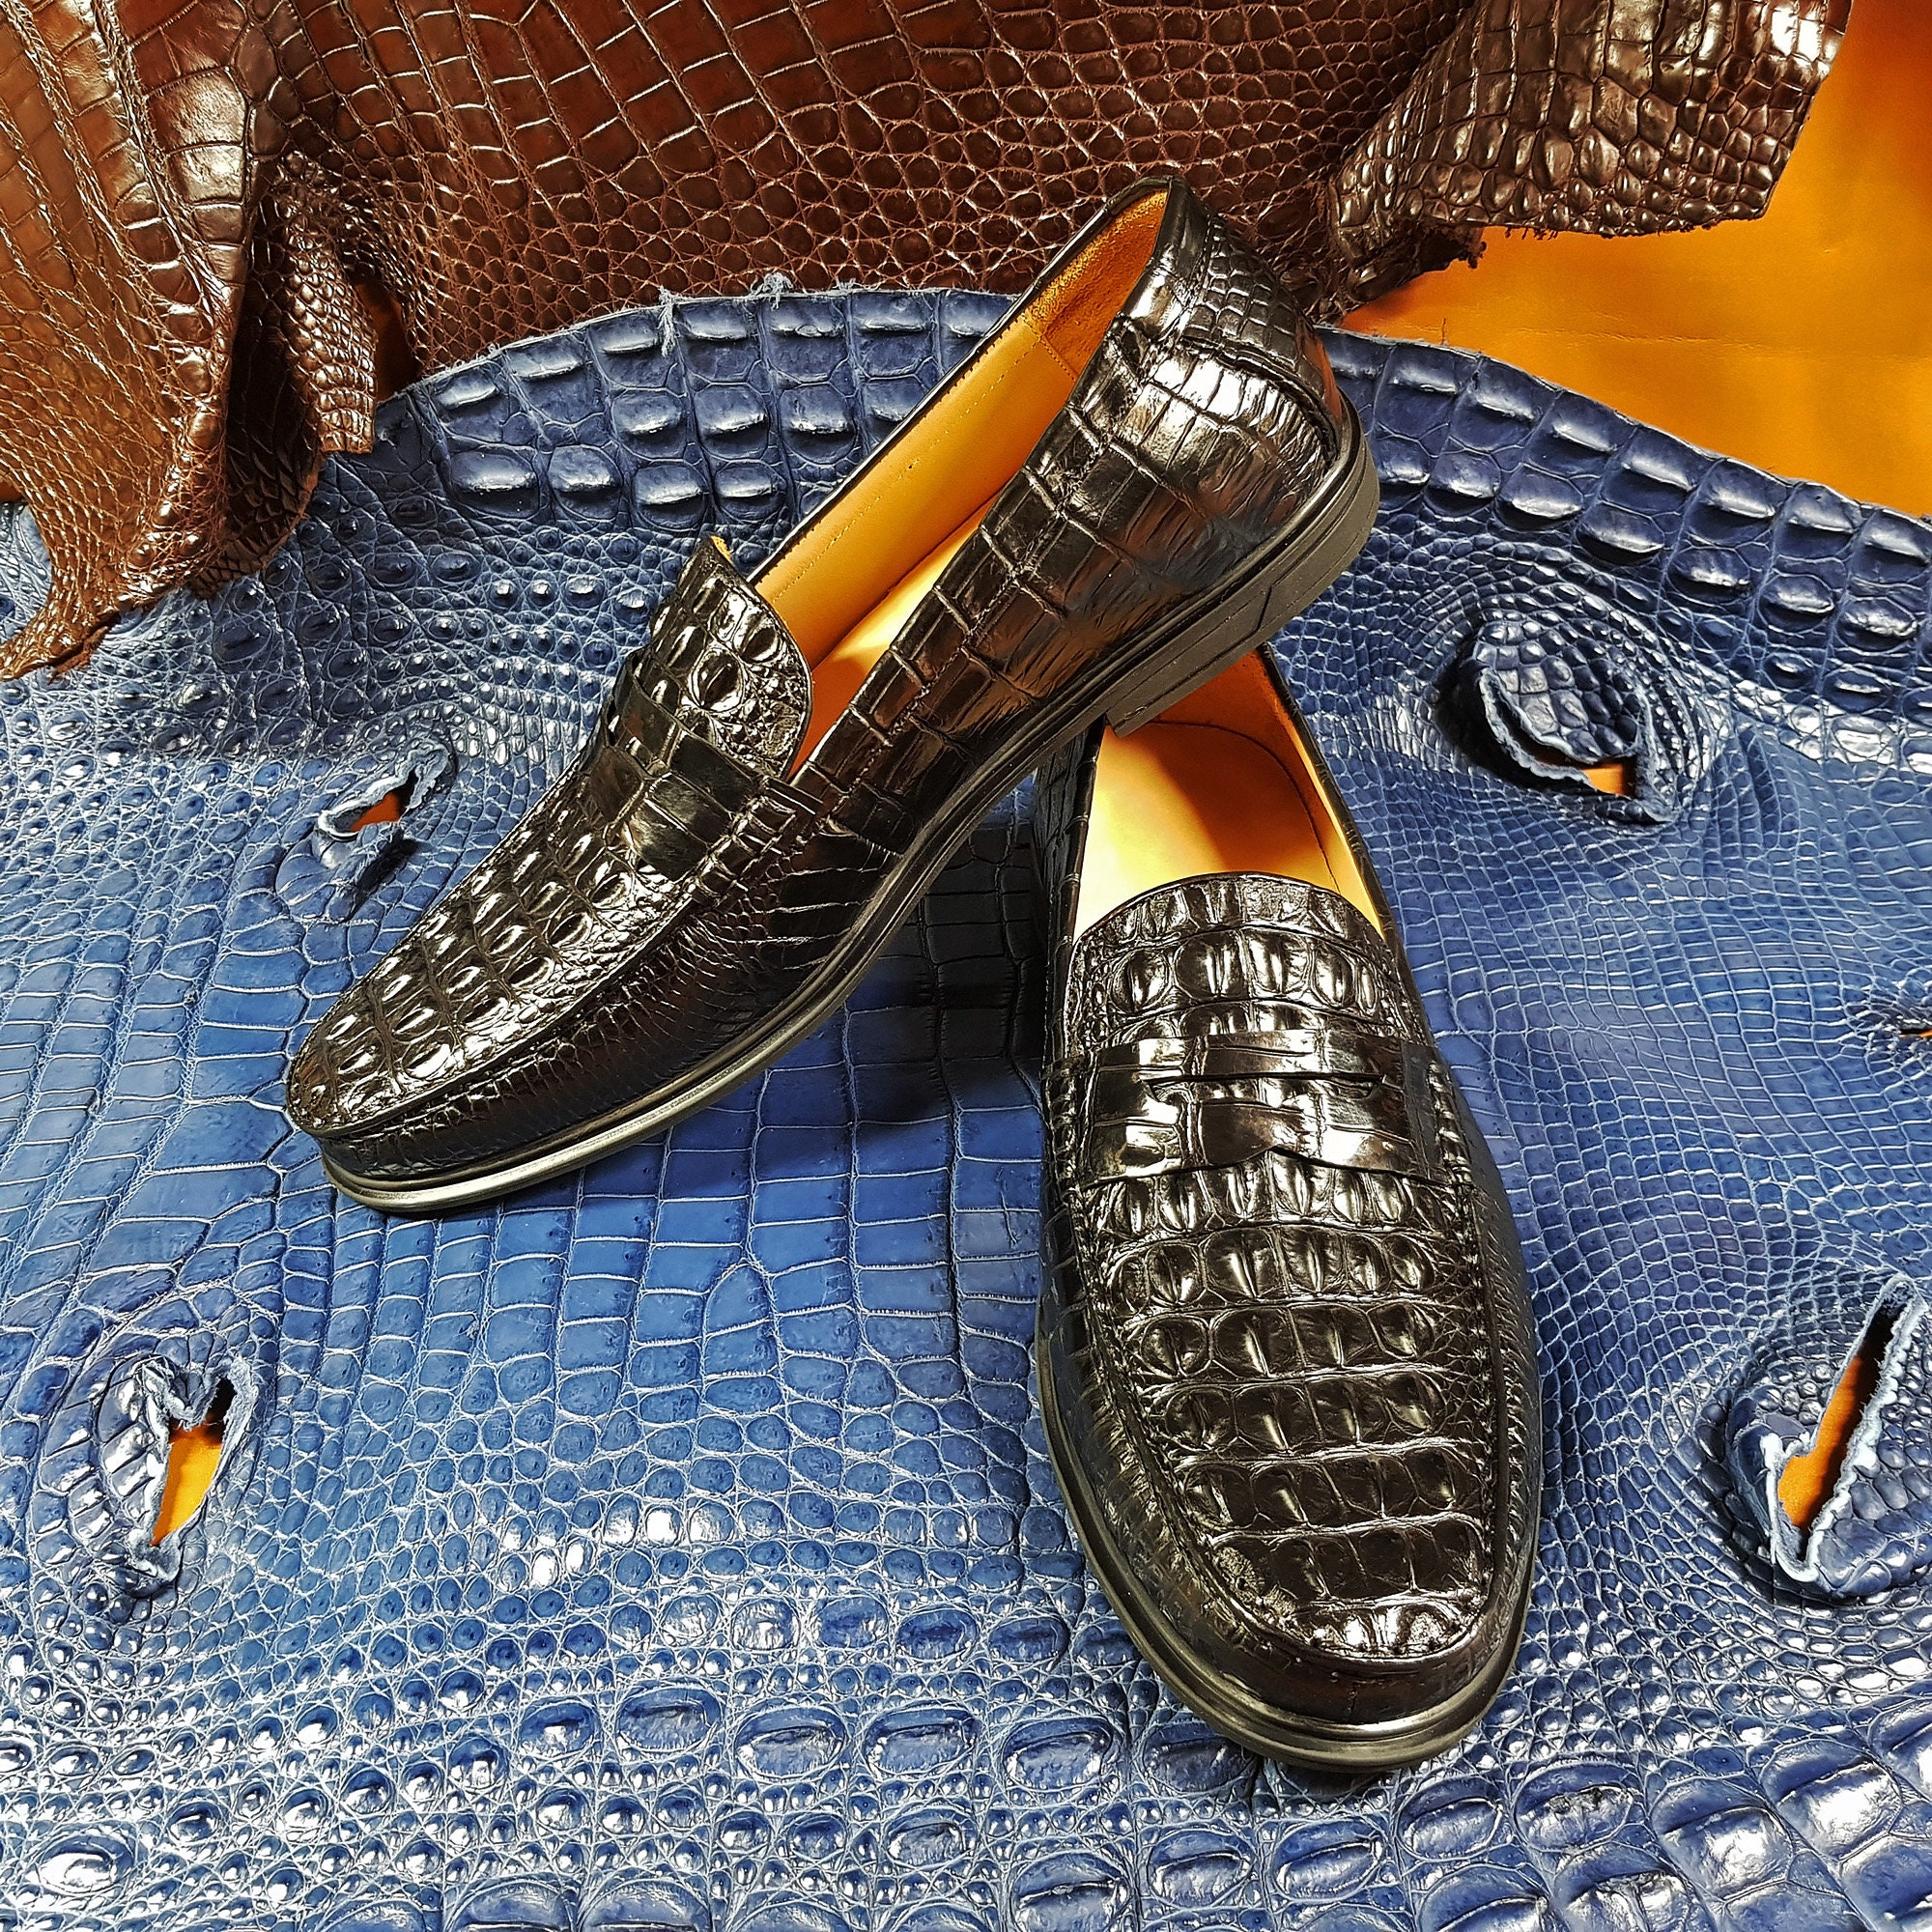 Premium Quality Black Alligator Print Leather Loafers Slip On Party Wear  Shoes